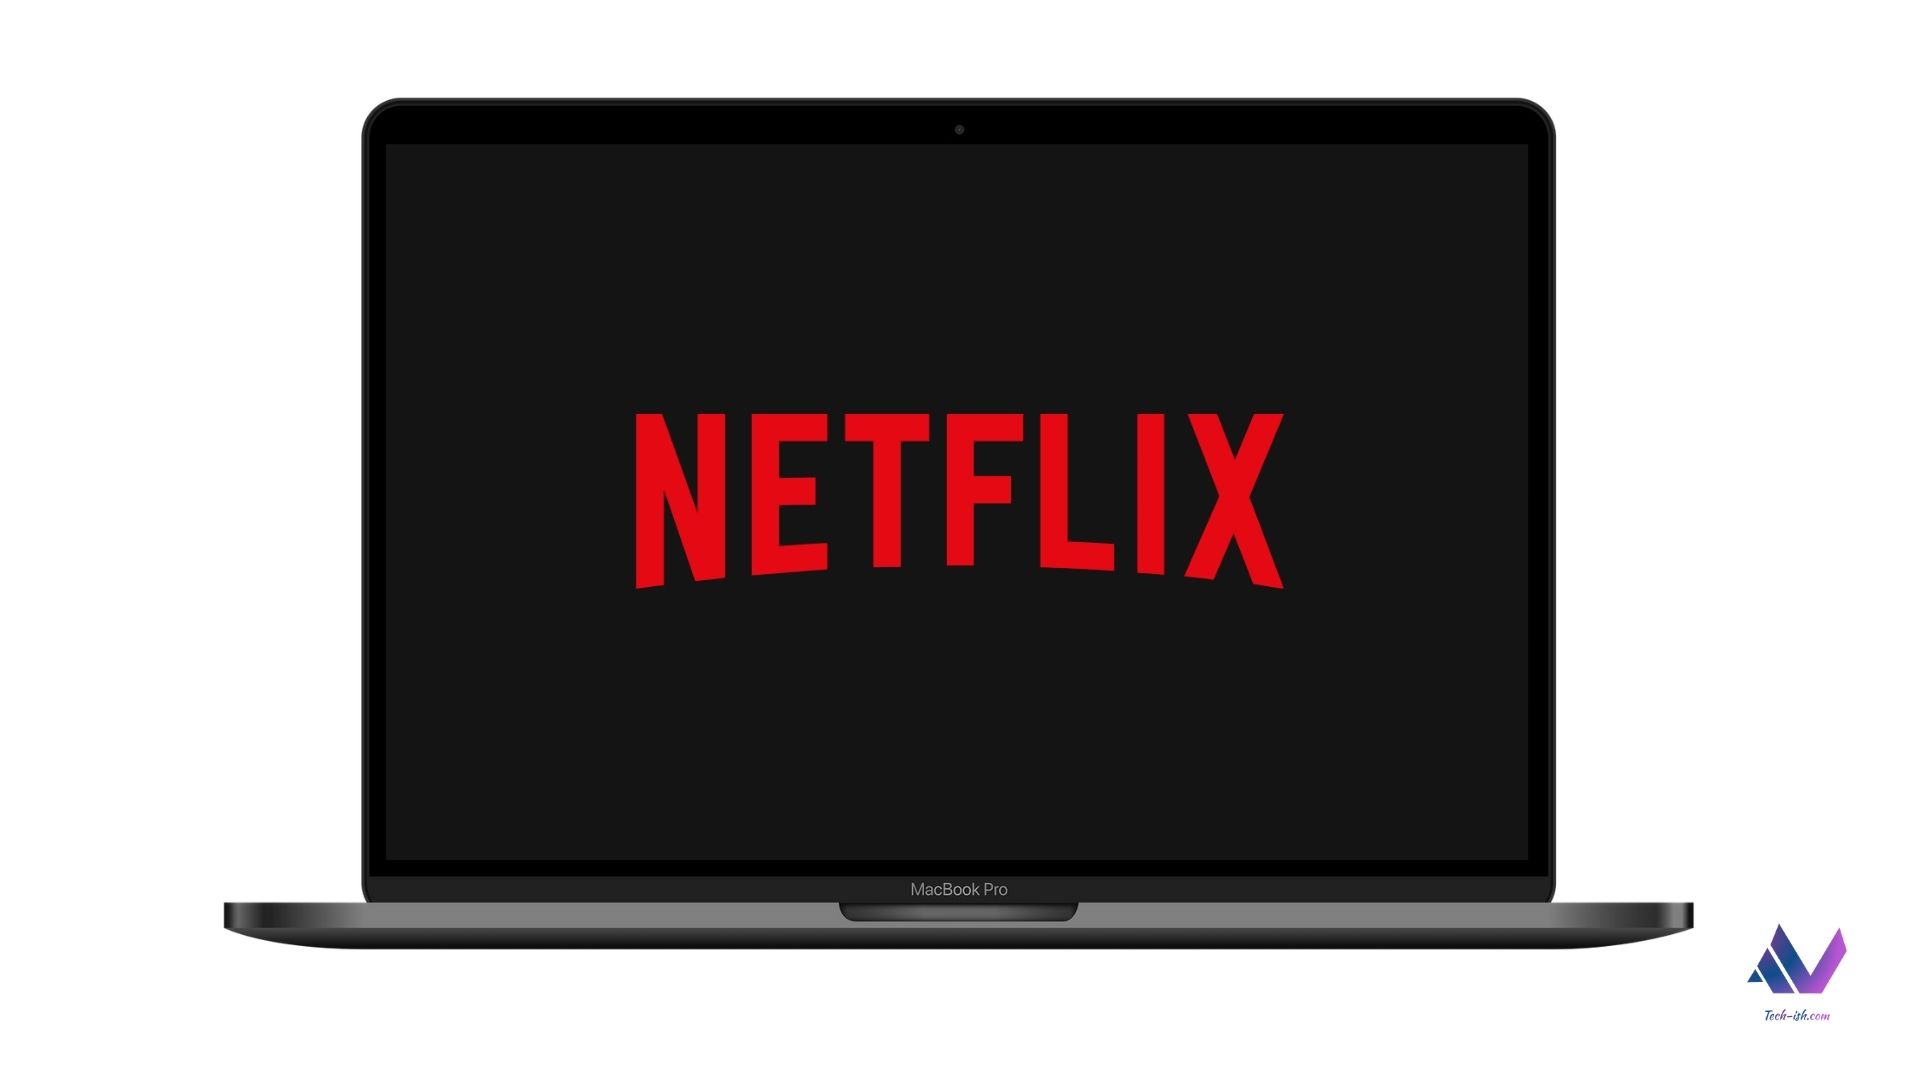 Why don't we have a Netflix for Mac App even with Big Sur, and M1 Chips? Would't it be great to watch content saved offline on your M1 Macbook?